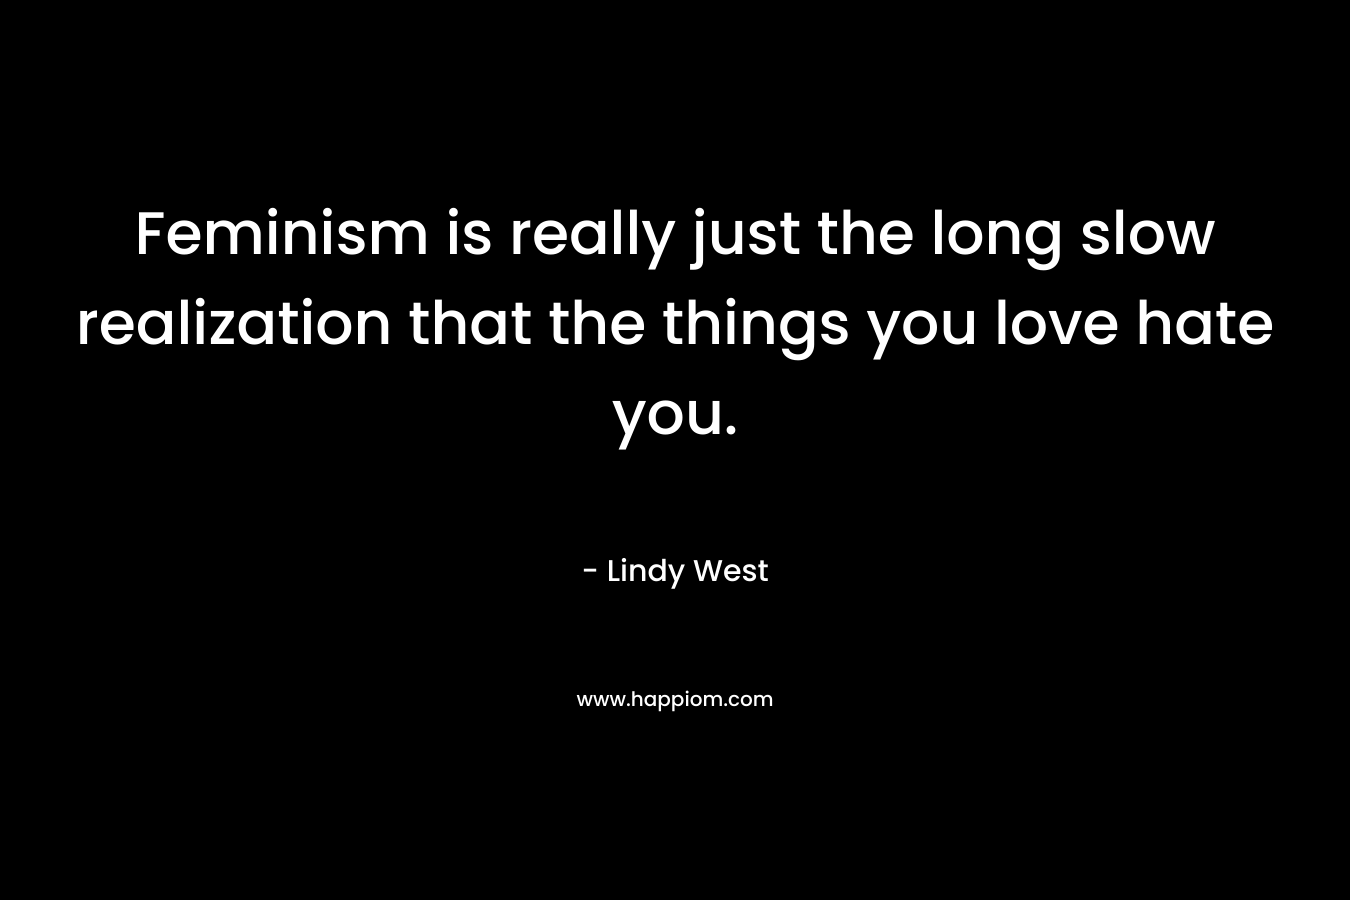 Feminism is really just the long slow realization that the things you love hate you.